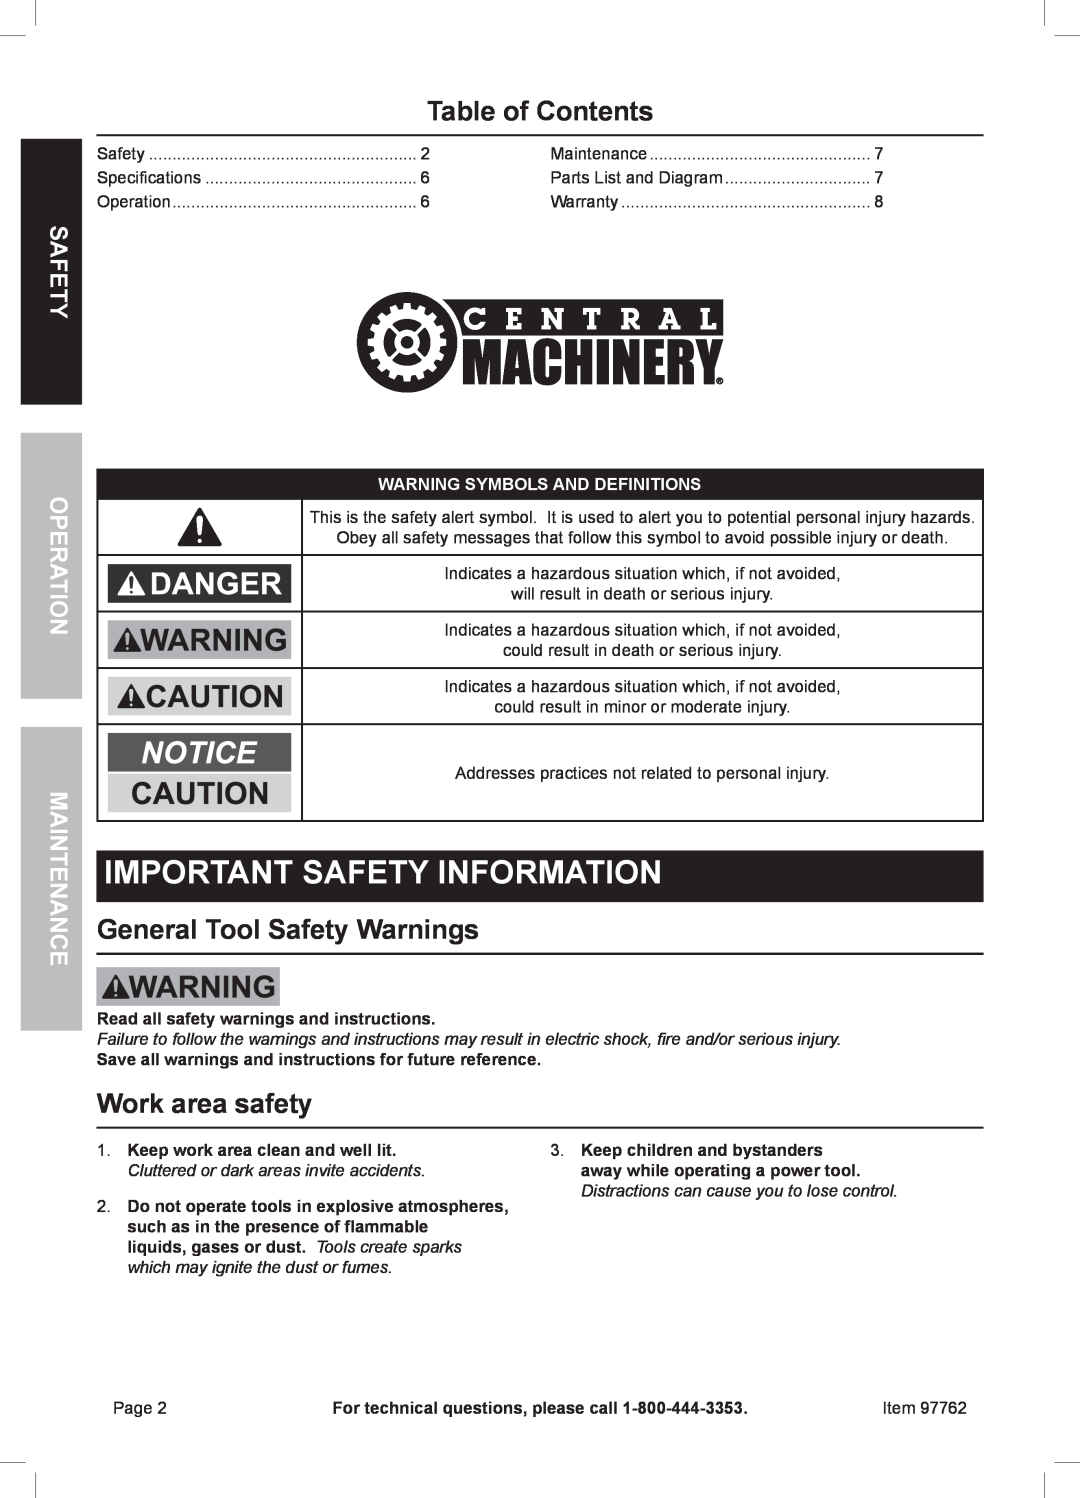 Harbor Freight Tools 97762 manual Table of Contents, General Tool Safety Warnings, Work area safety, Operation Maintenance 